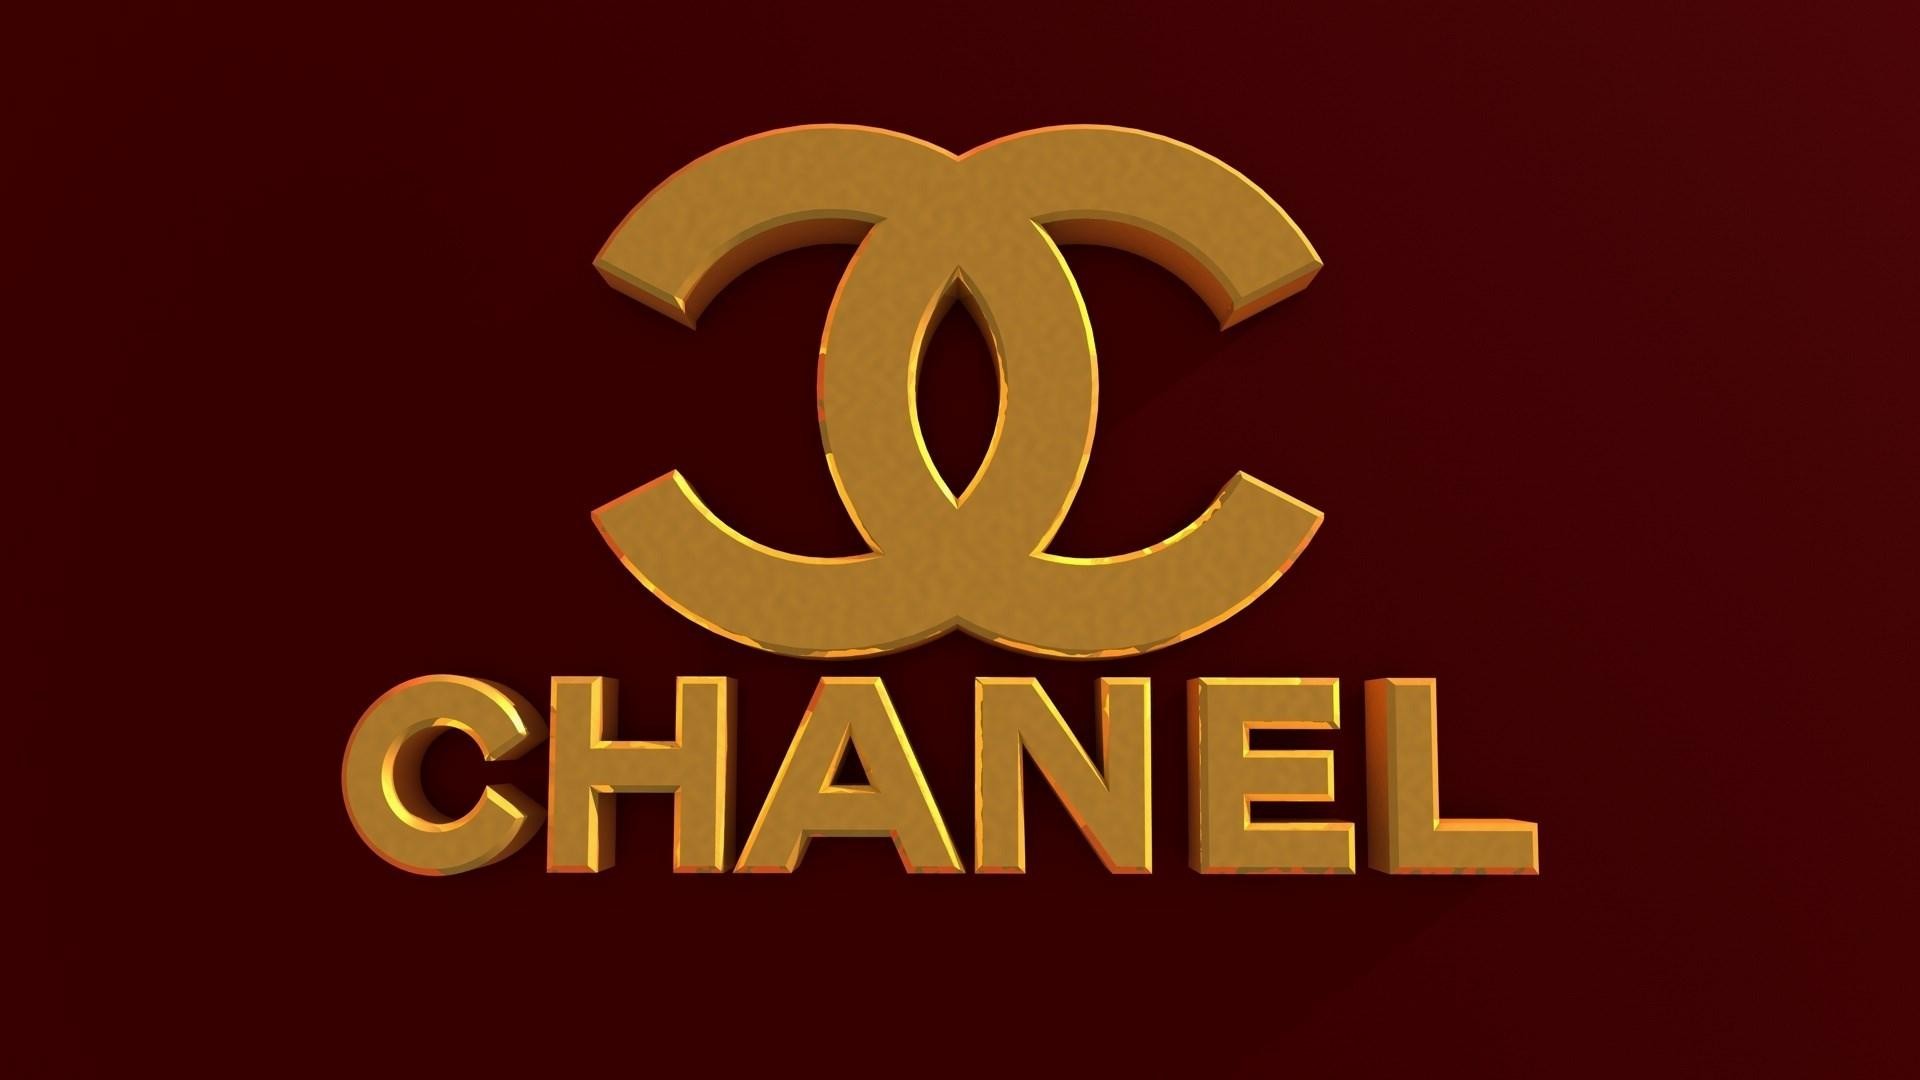 Chanel wallpaper by rainbowrose1993  Download on ZEDGE  dab7